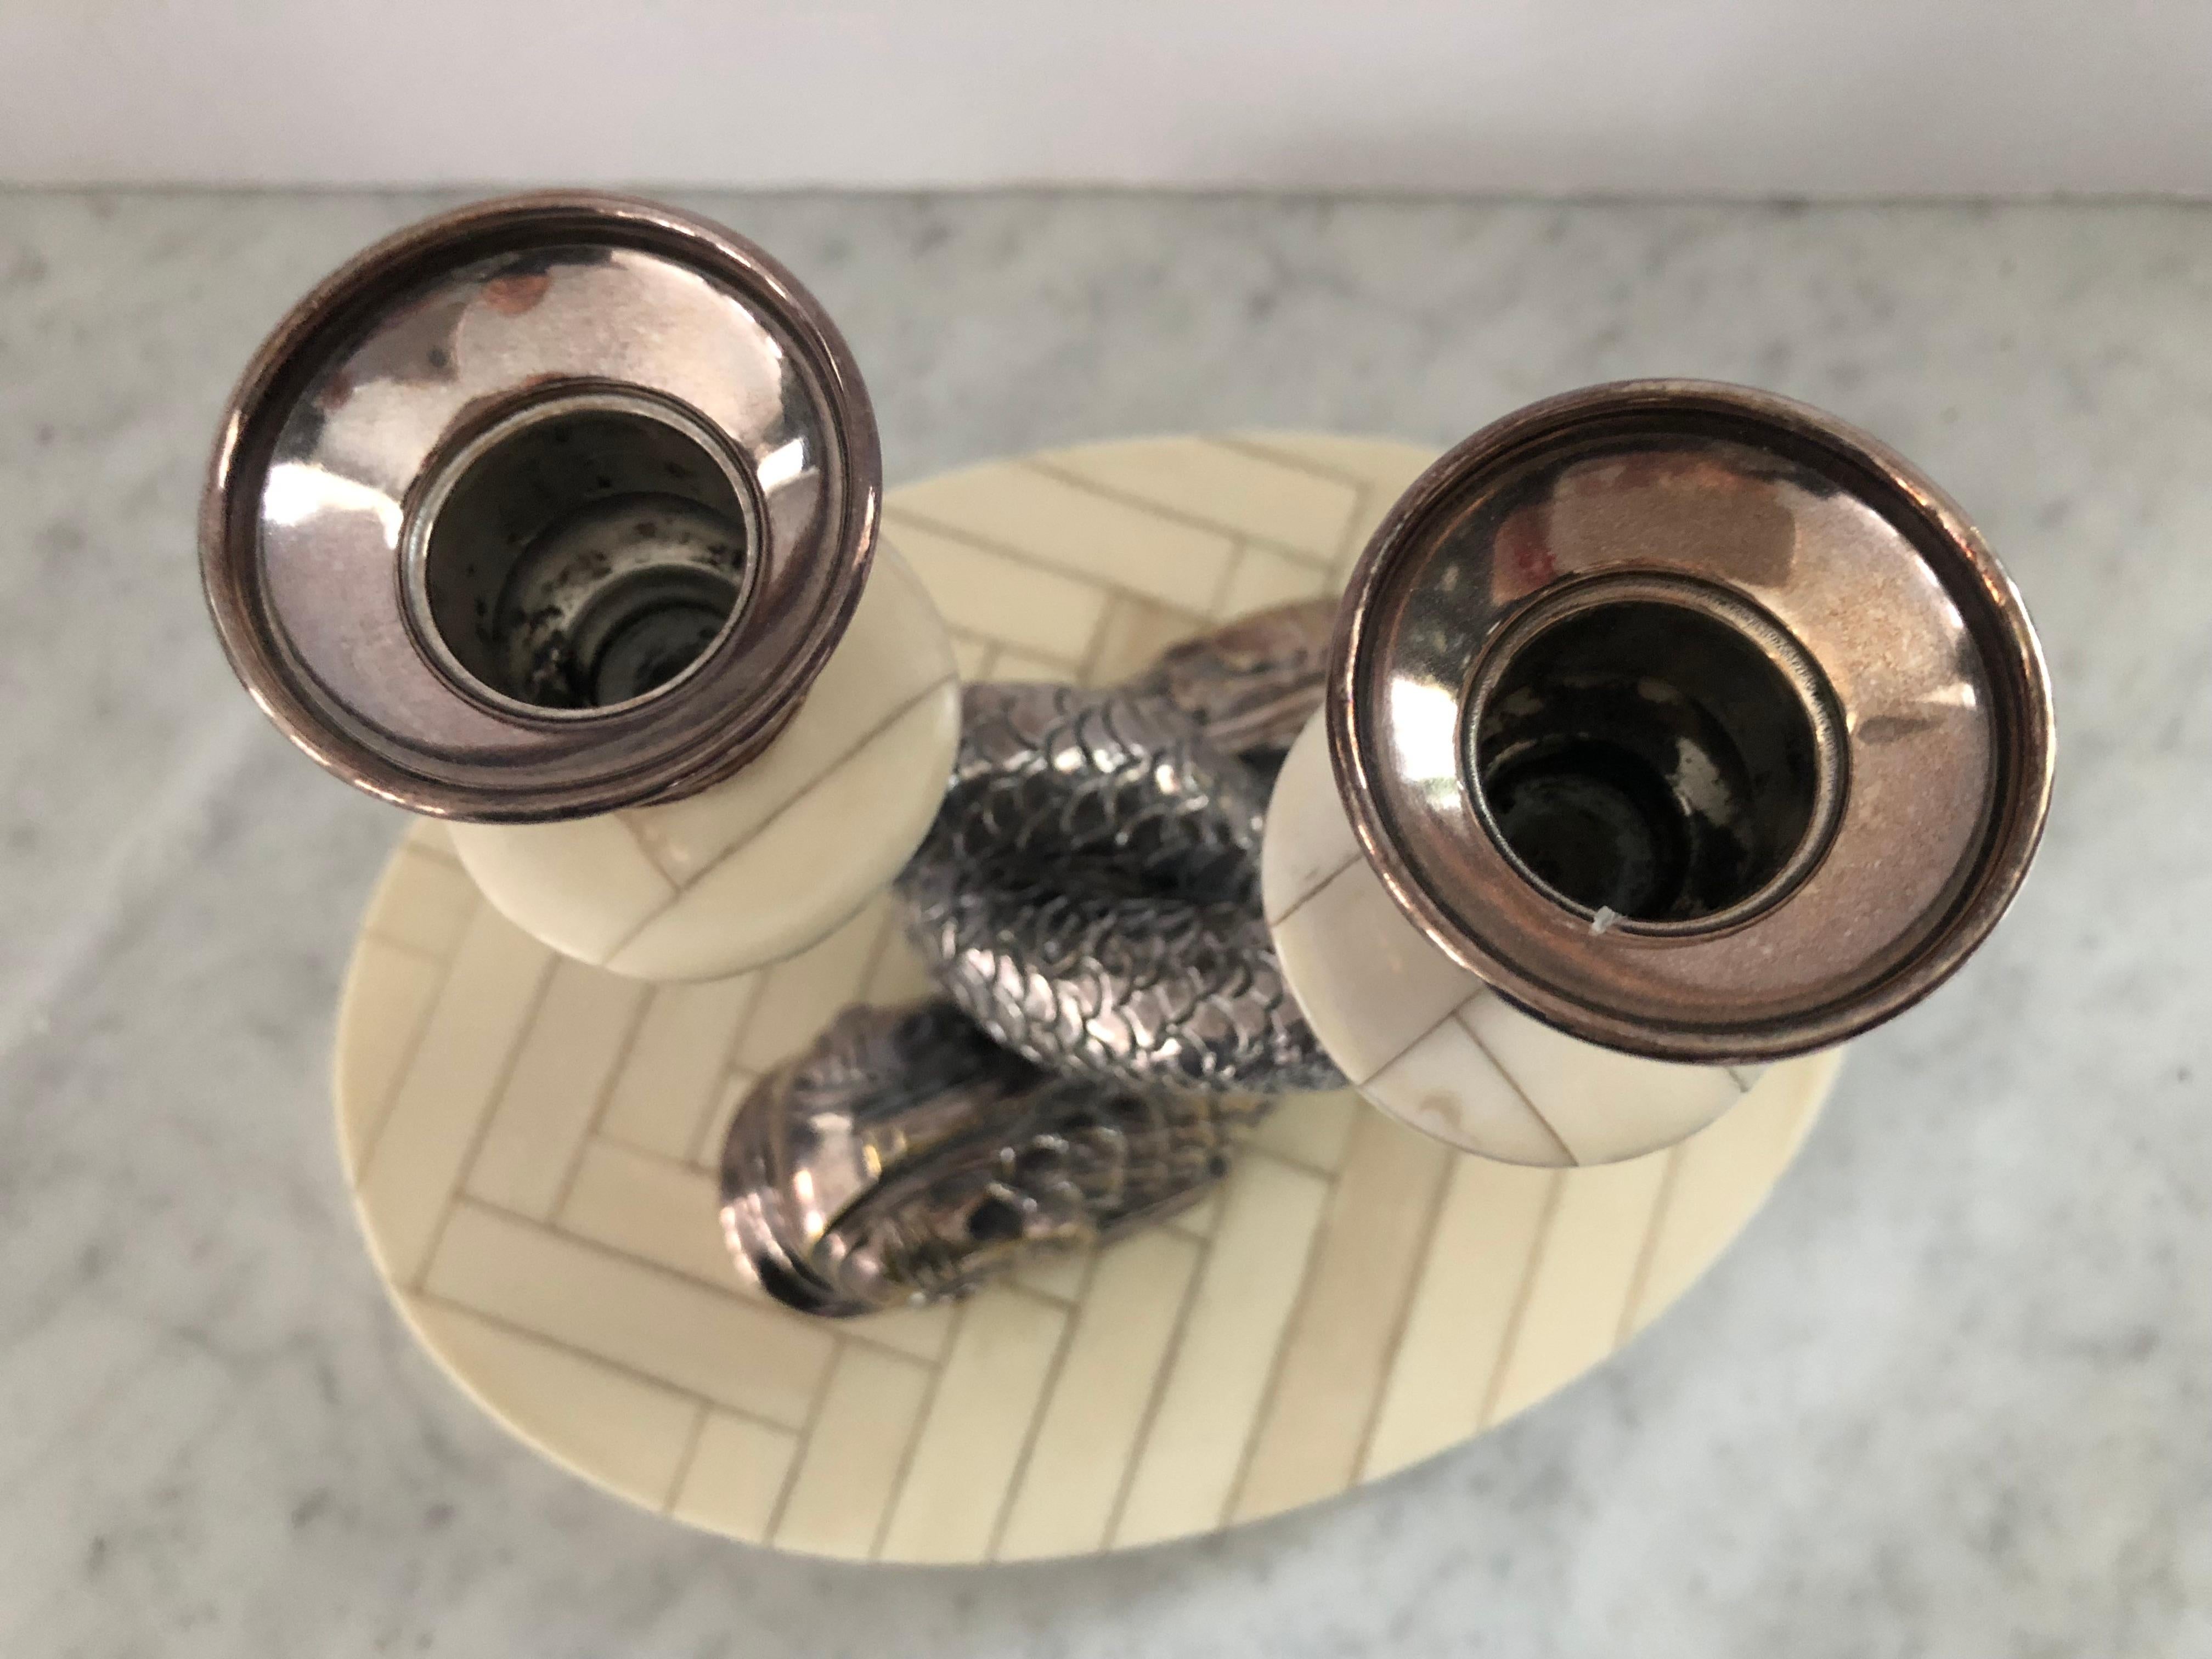 Fabulous pair of midcentury entwined dolphin candlesticks in silver plate by Anthony Redmile (UK). Known for his unique tabletop creations, these candlesticks are on oval tessellated bone bases. One candlestick has a small bend in the candle cup and